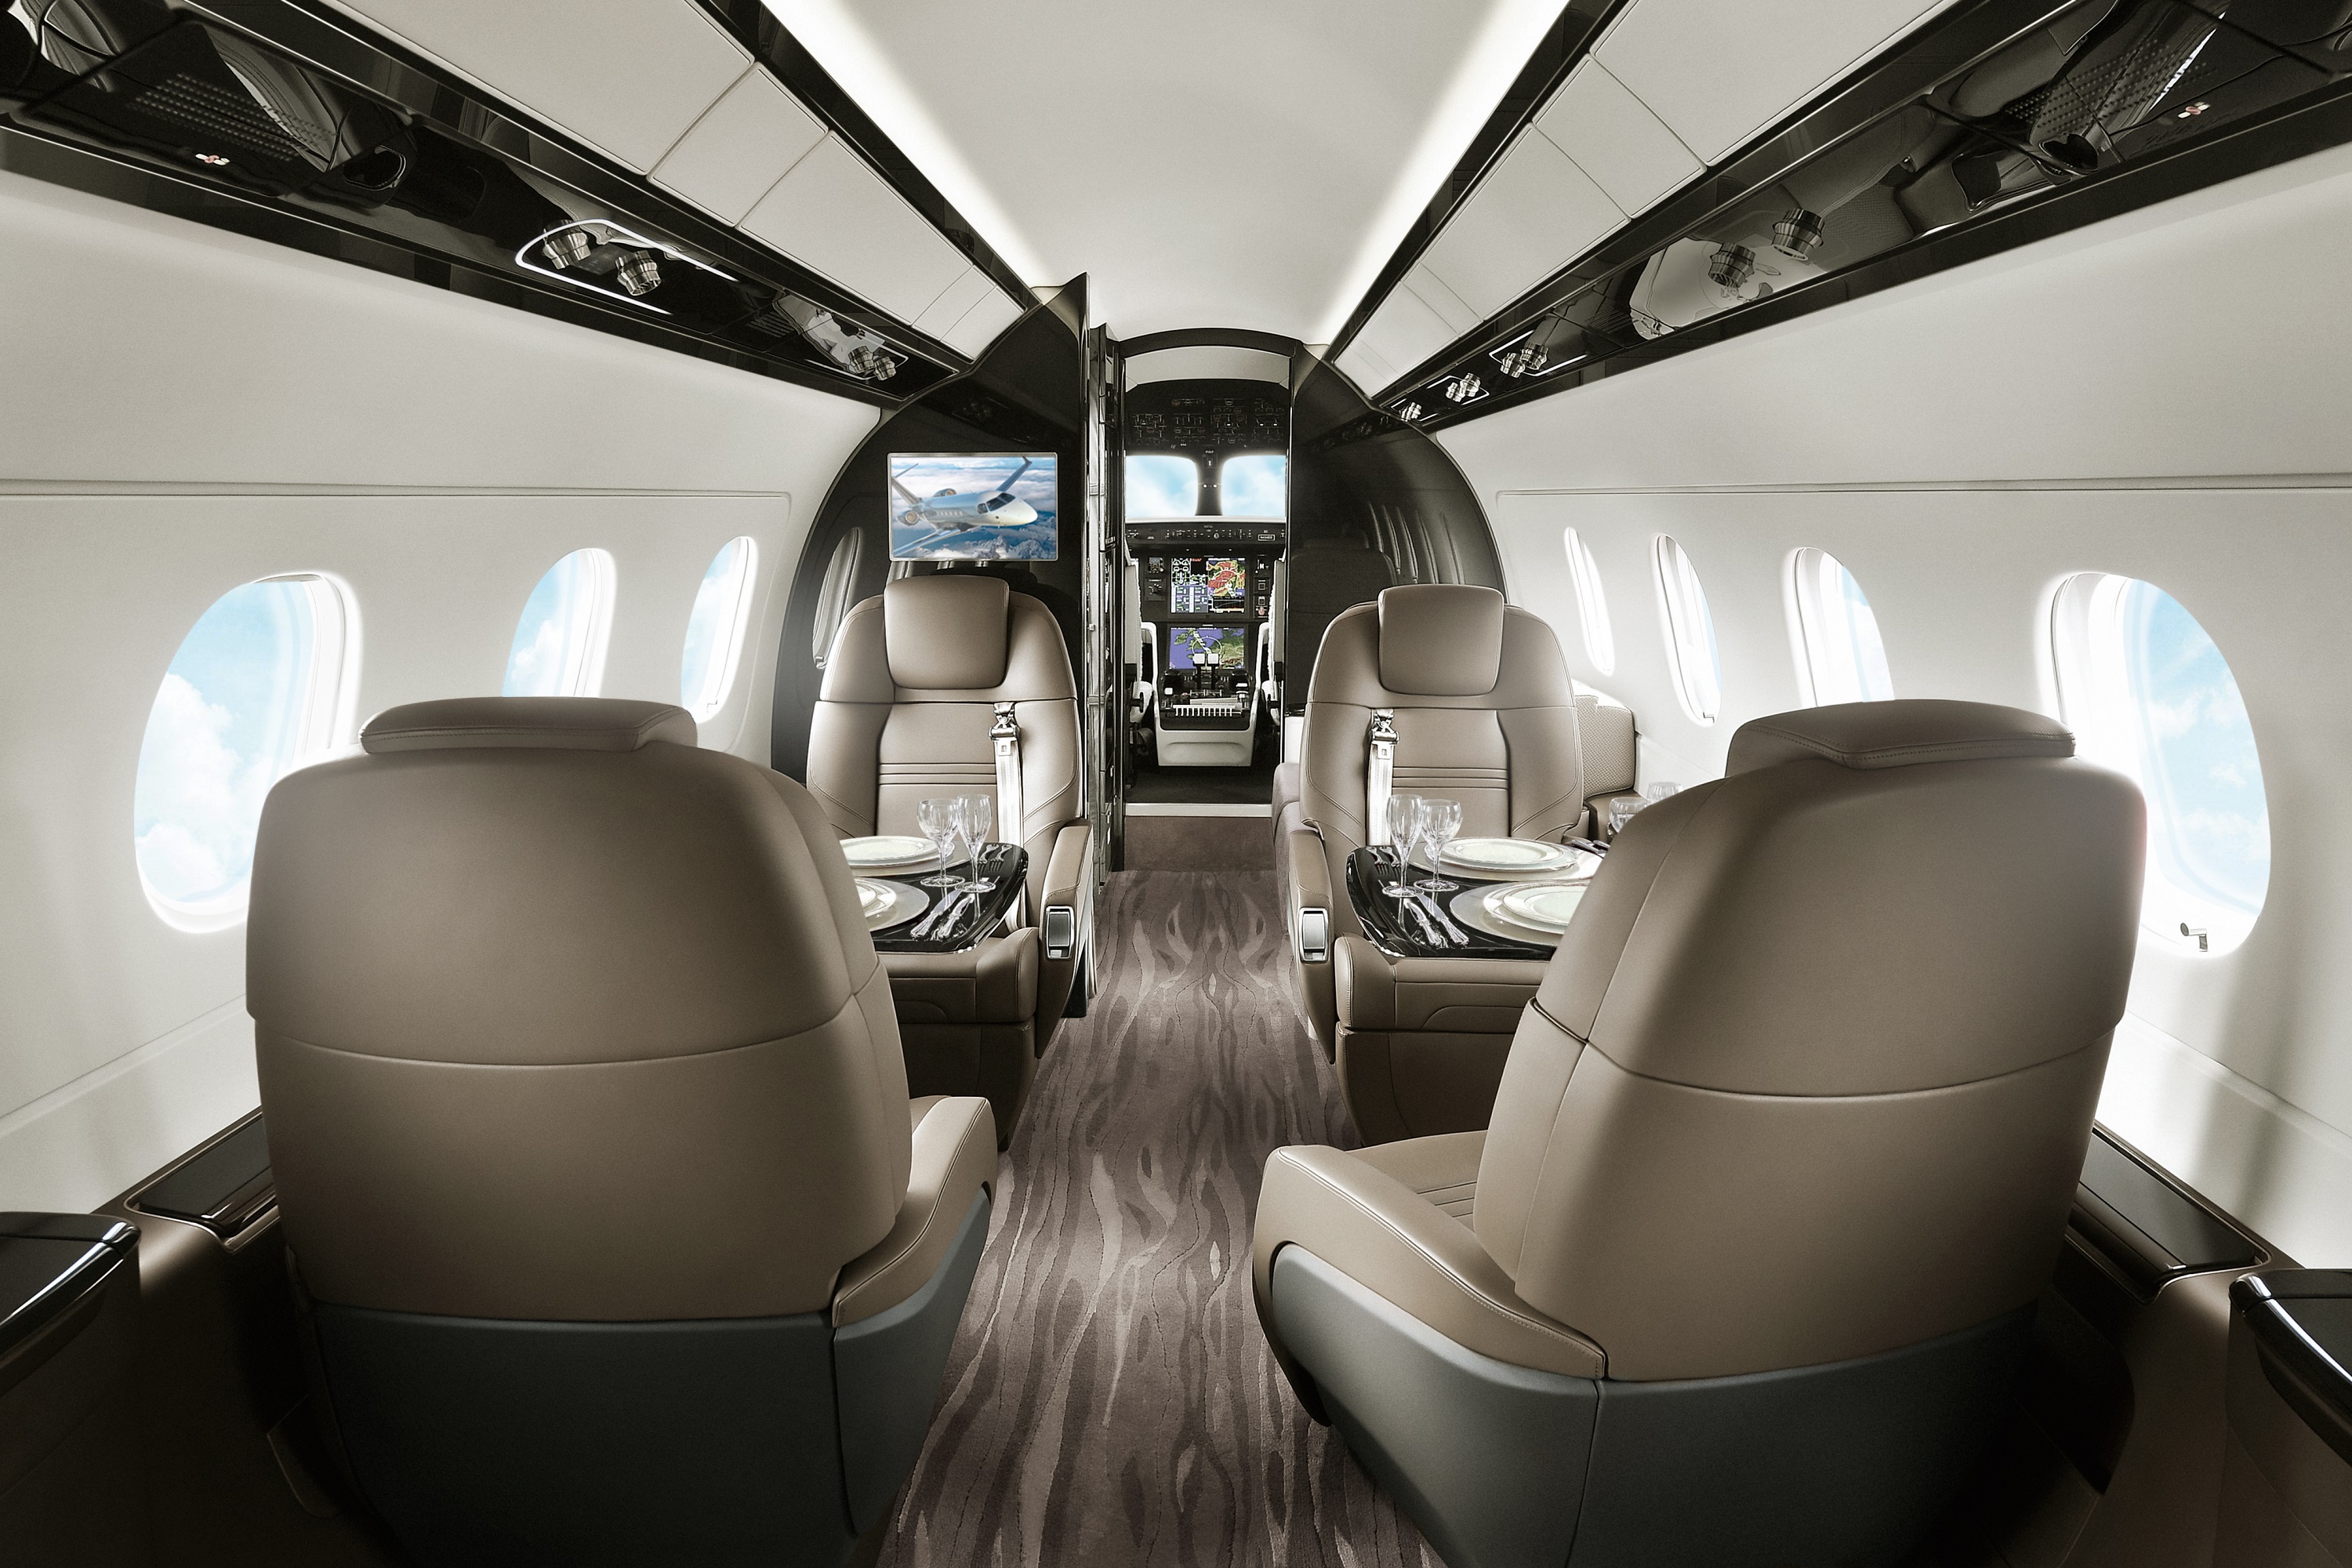 Luxurious cabin of an Embraer Praetor 500. Click to enlarge.